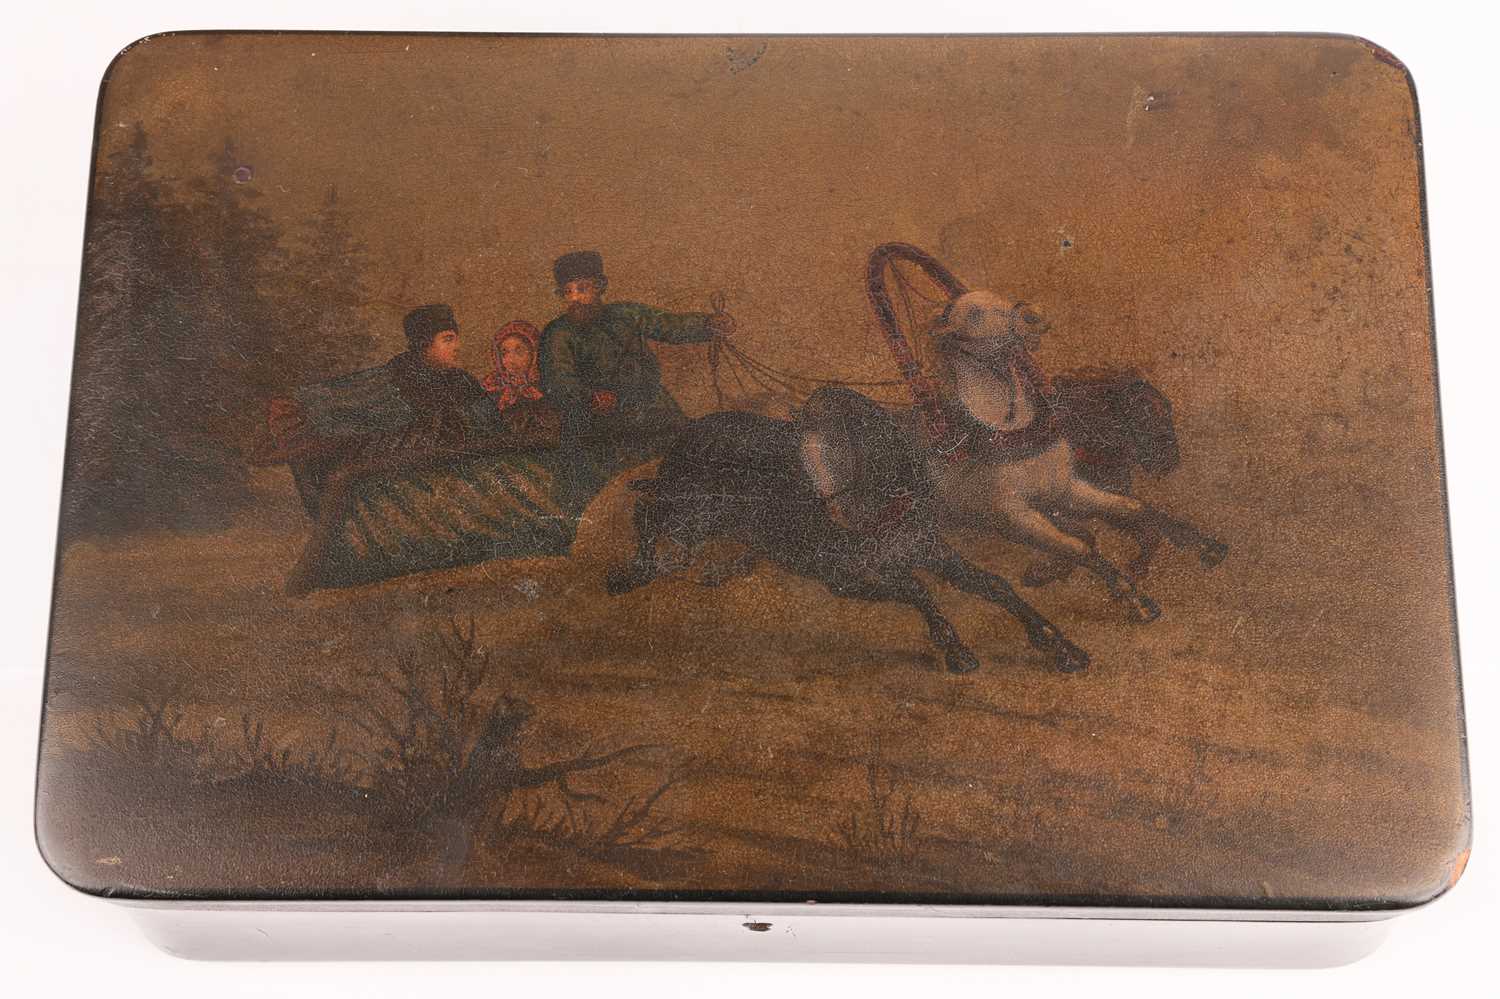 Late 19th-century Russian lacquer box, the lid with troika sled scene, together with a wooden sewing - Image 6 of 7